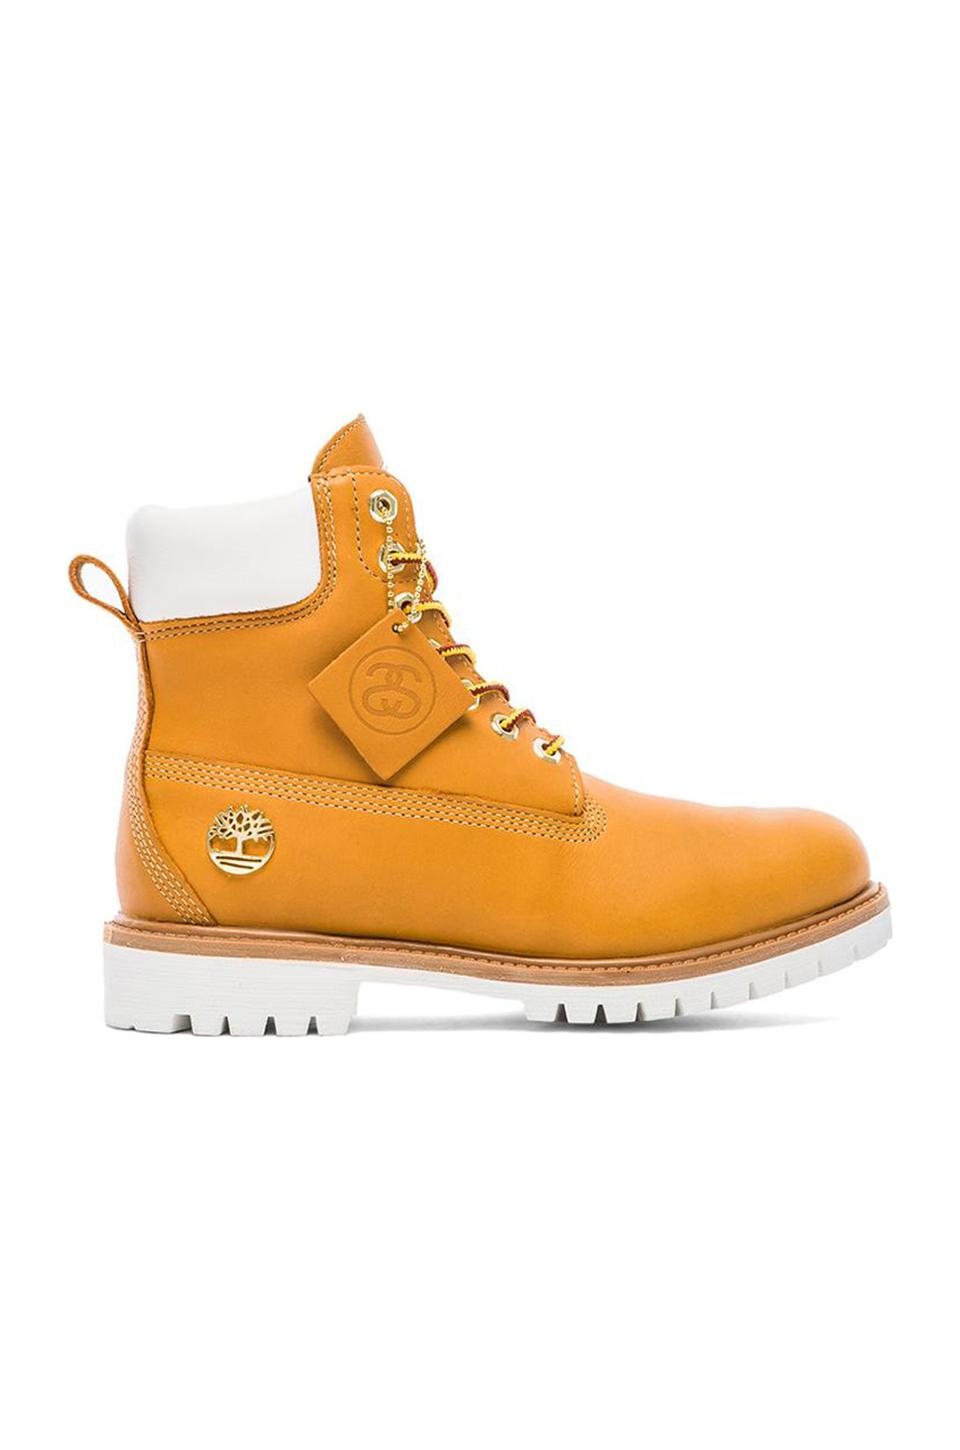 Stussy X Timberland Boot in Wheat | REVOLVE